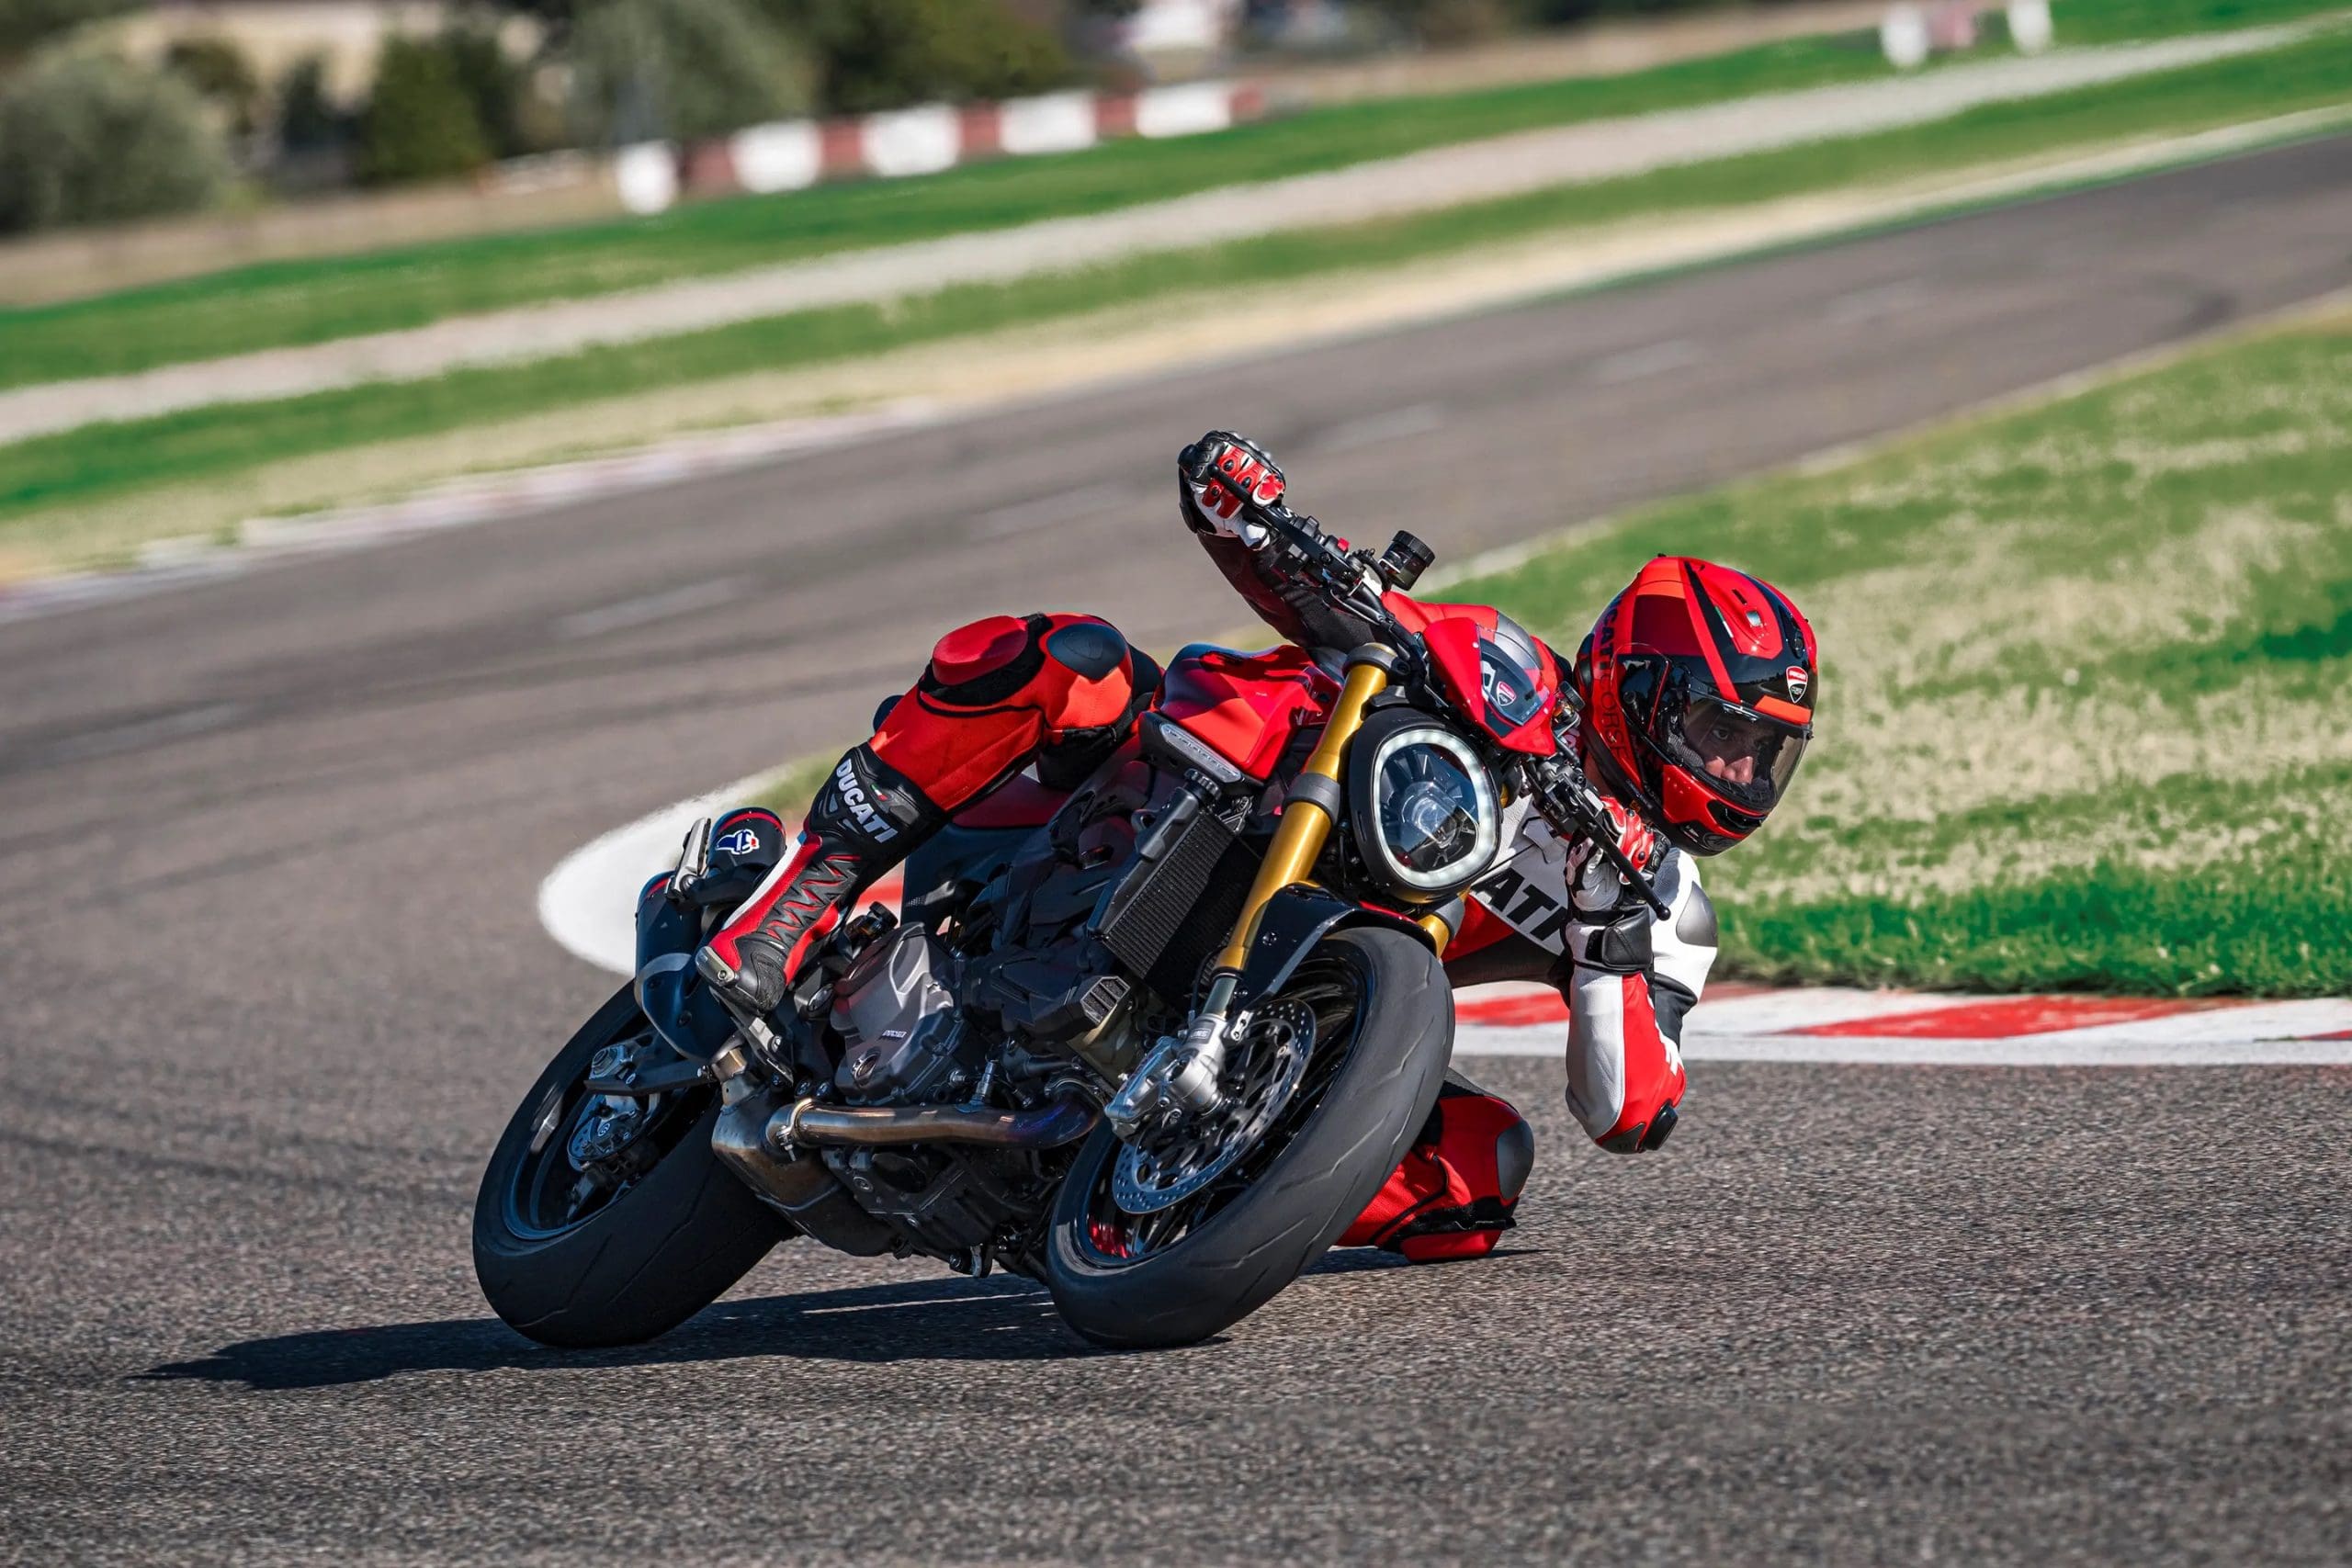 A view of previous efforts that dressed the 2023 Ducati World Première. Media sourced from the 2023 Ducati World Première.